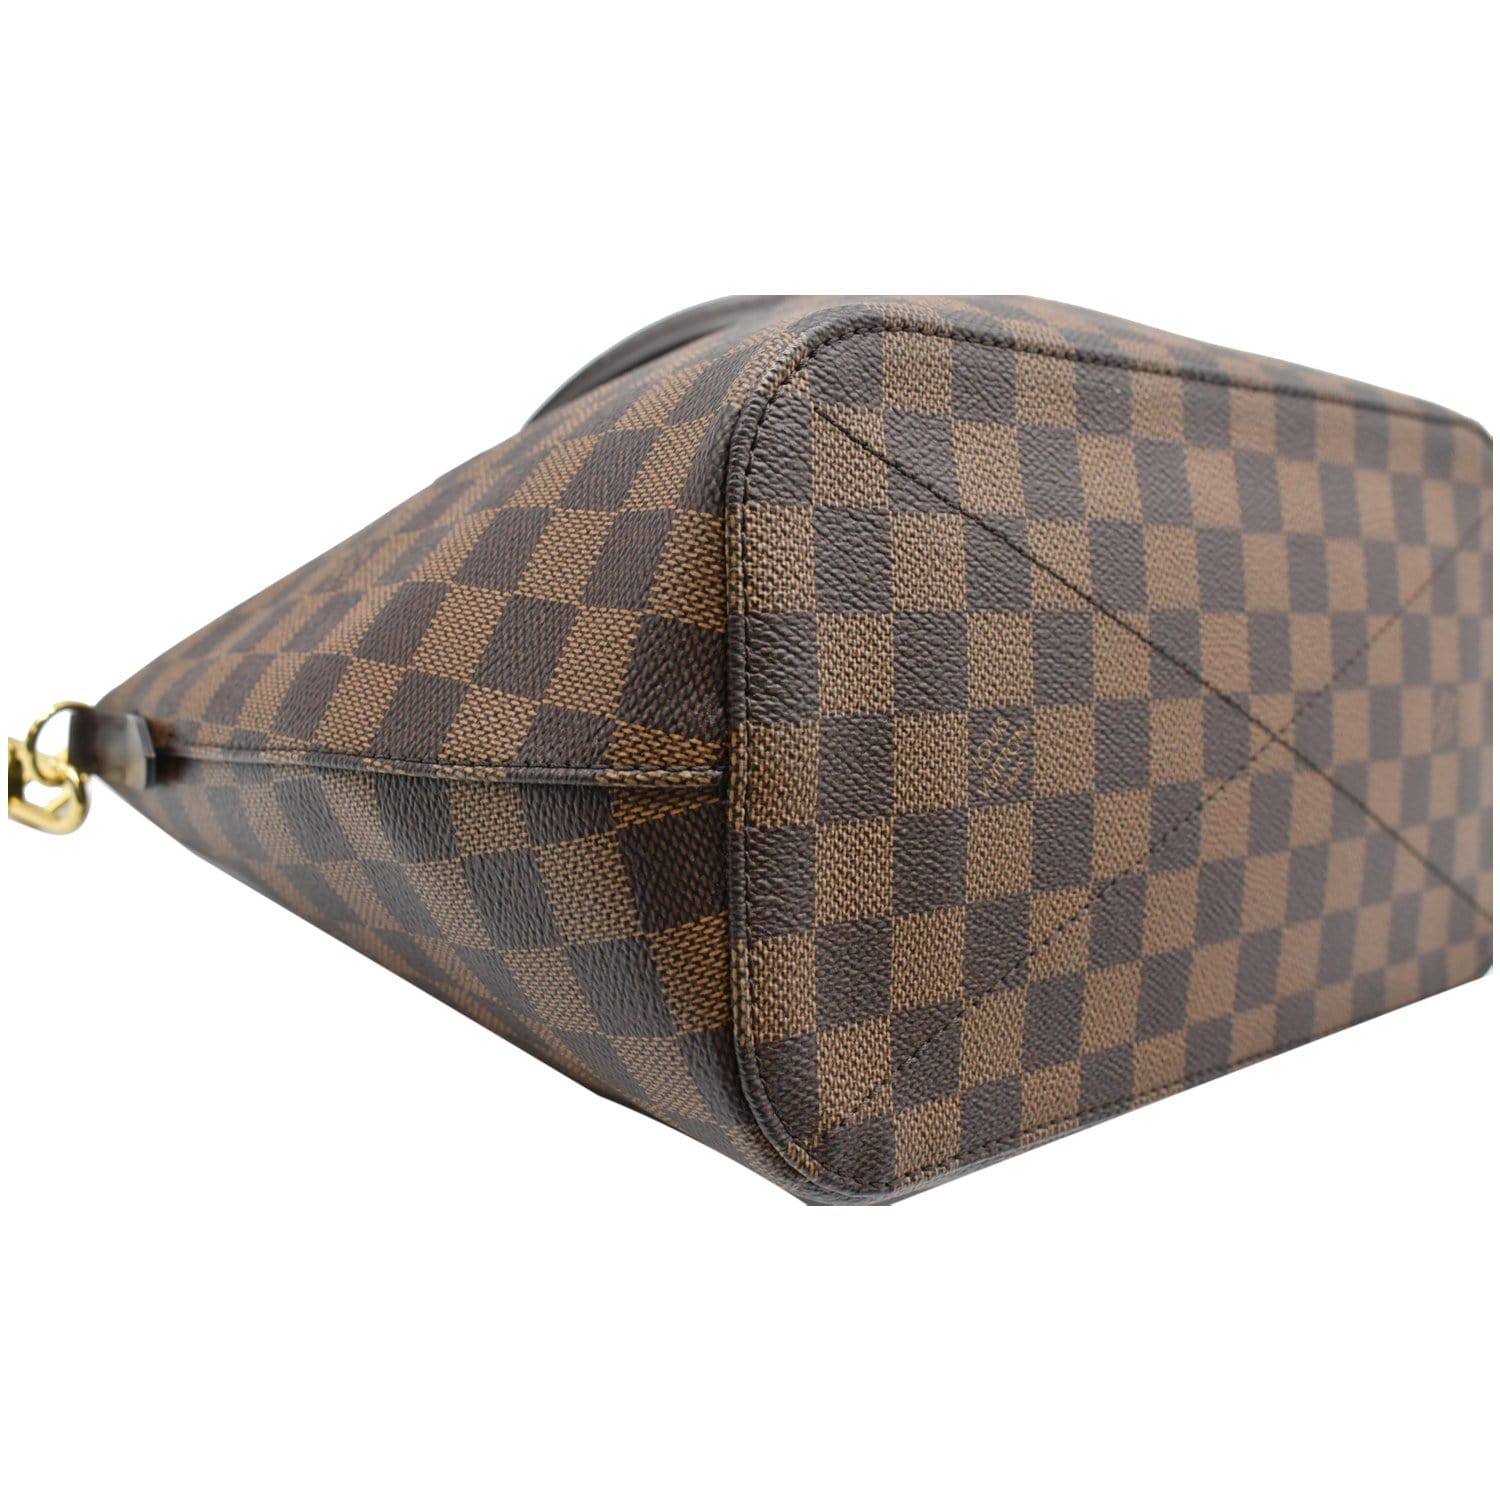 Louis Vuitton Siena - Any info on this bag?, Page 2